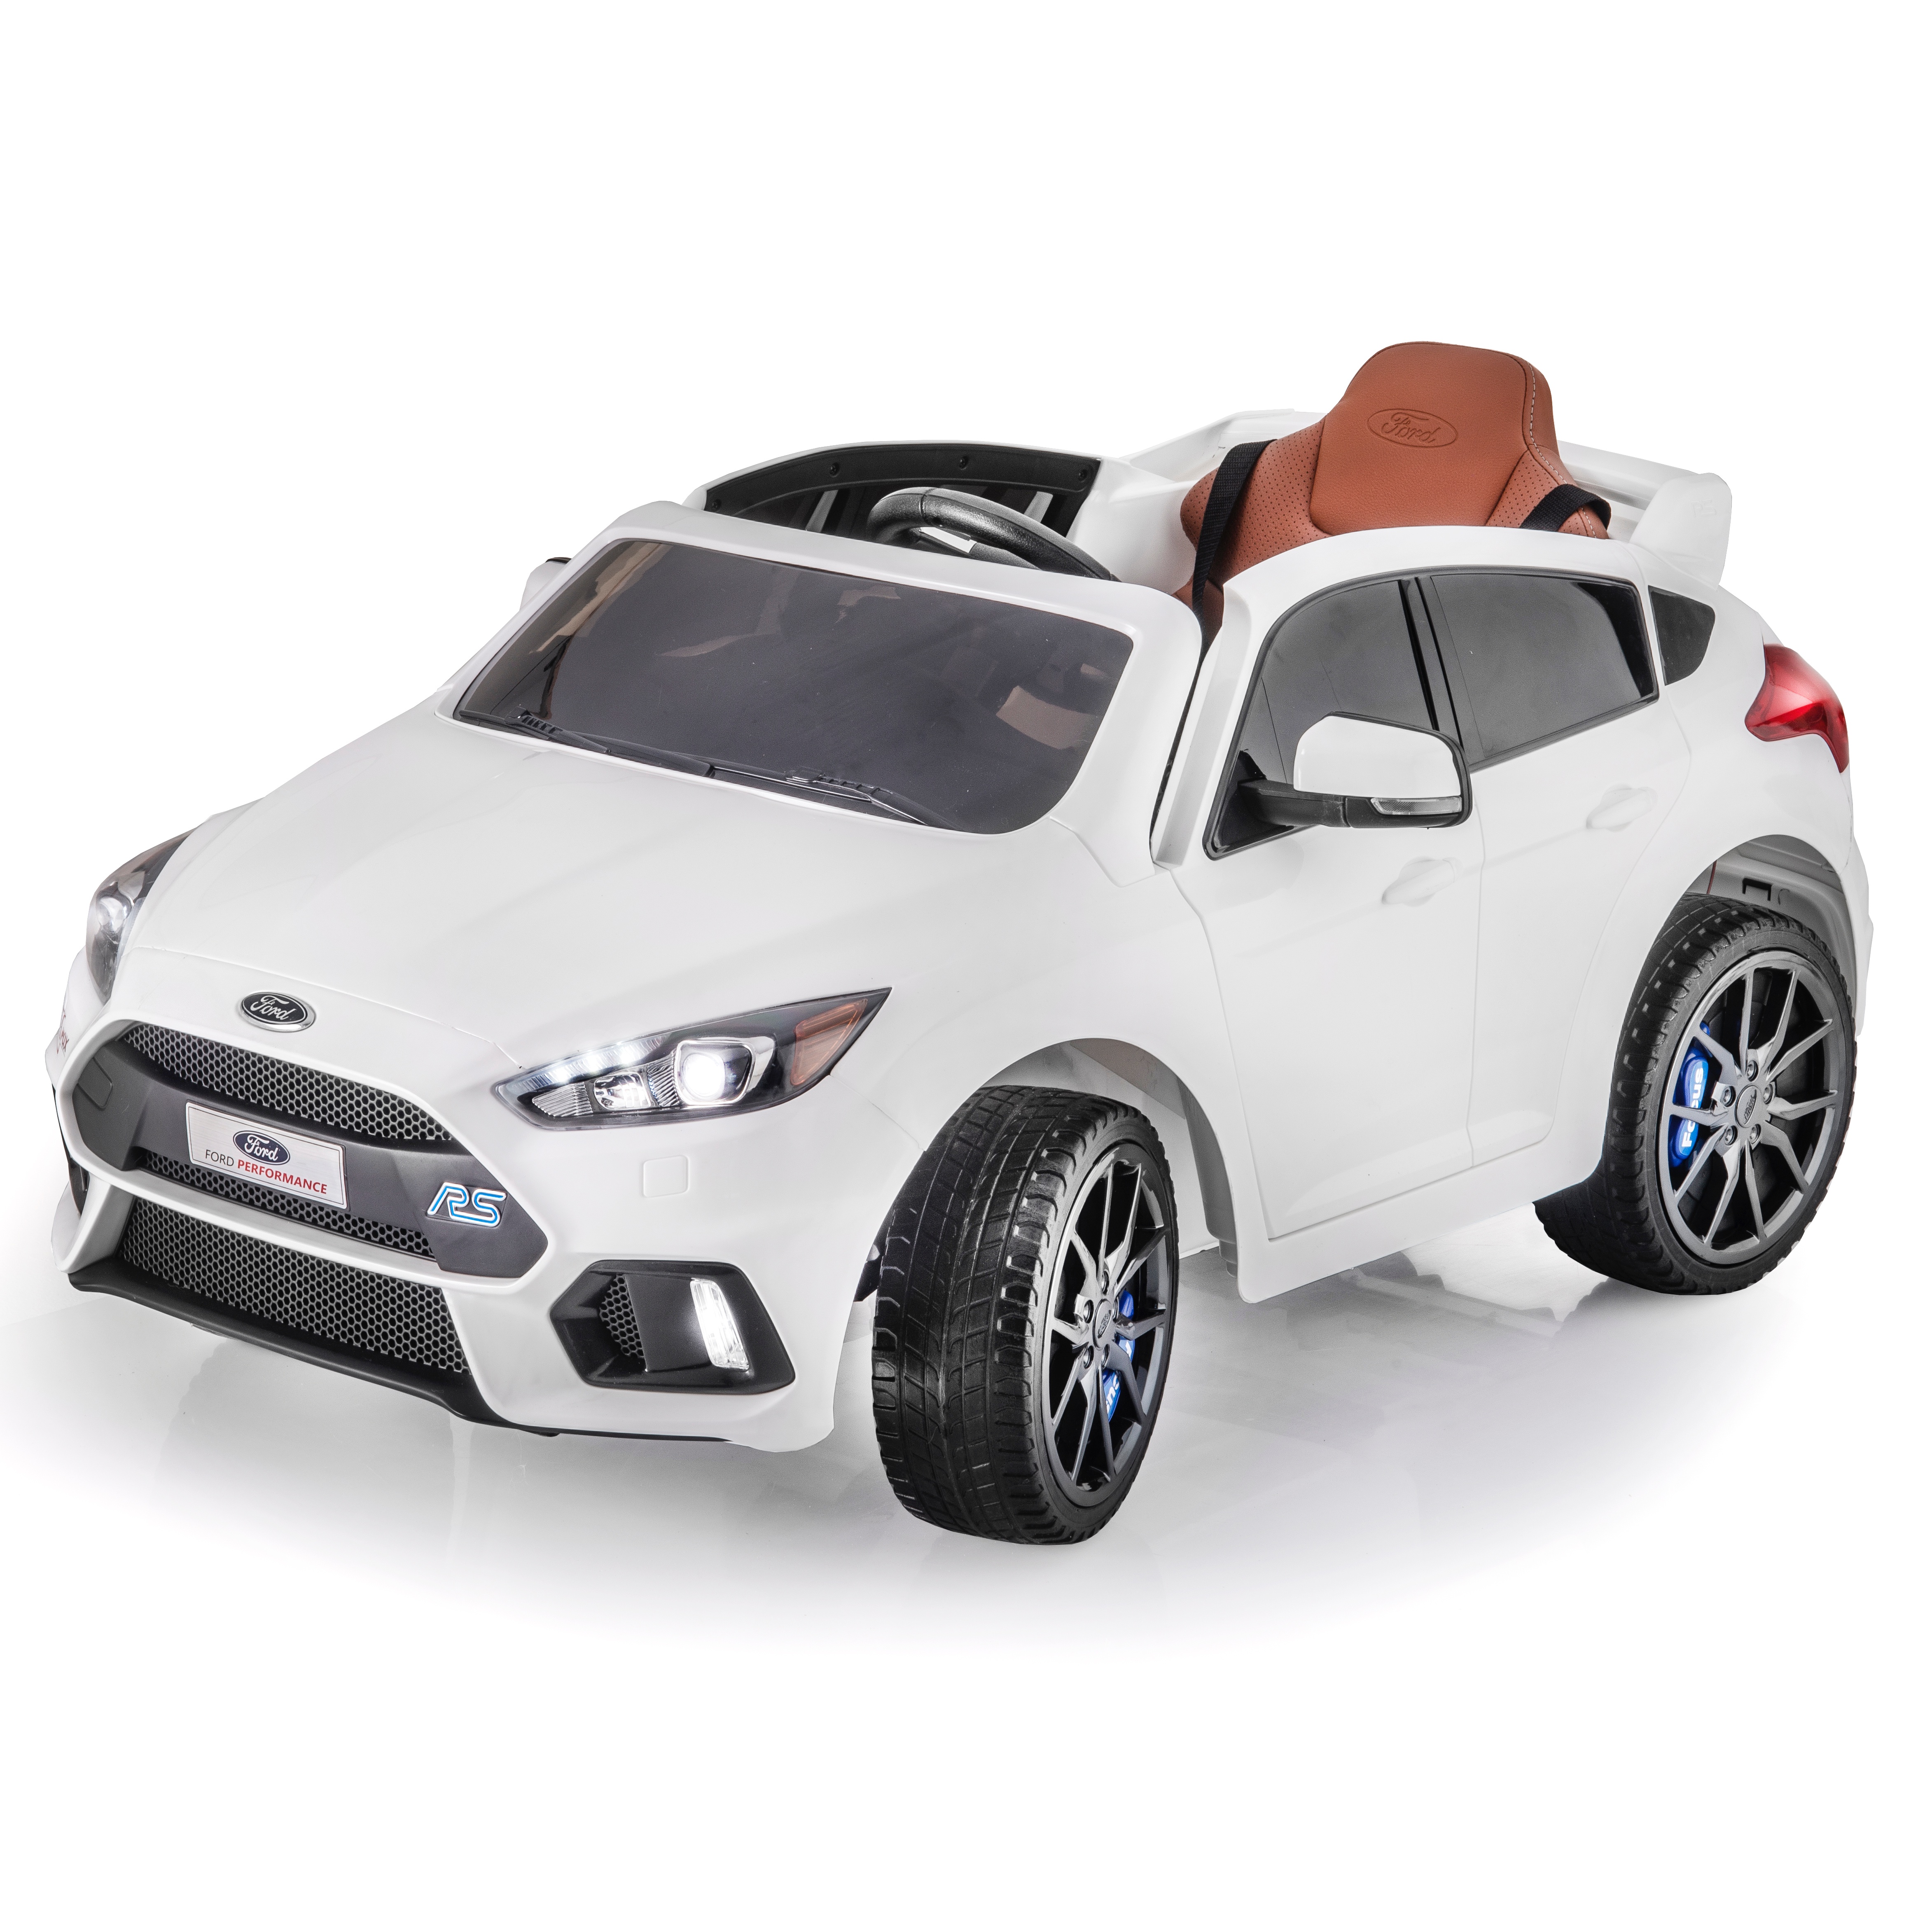 SUPERtrax Licensed Ford Focus RS Kid's Ride On Car, Battery Powered, Remote Control - Frozen White - image 1 of 11